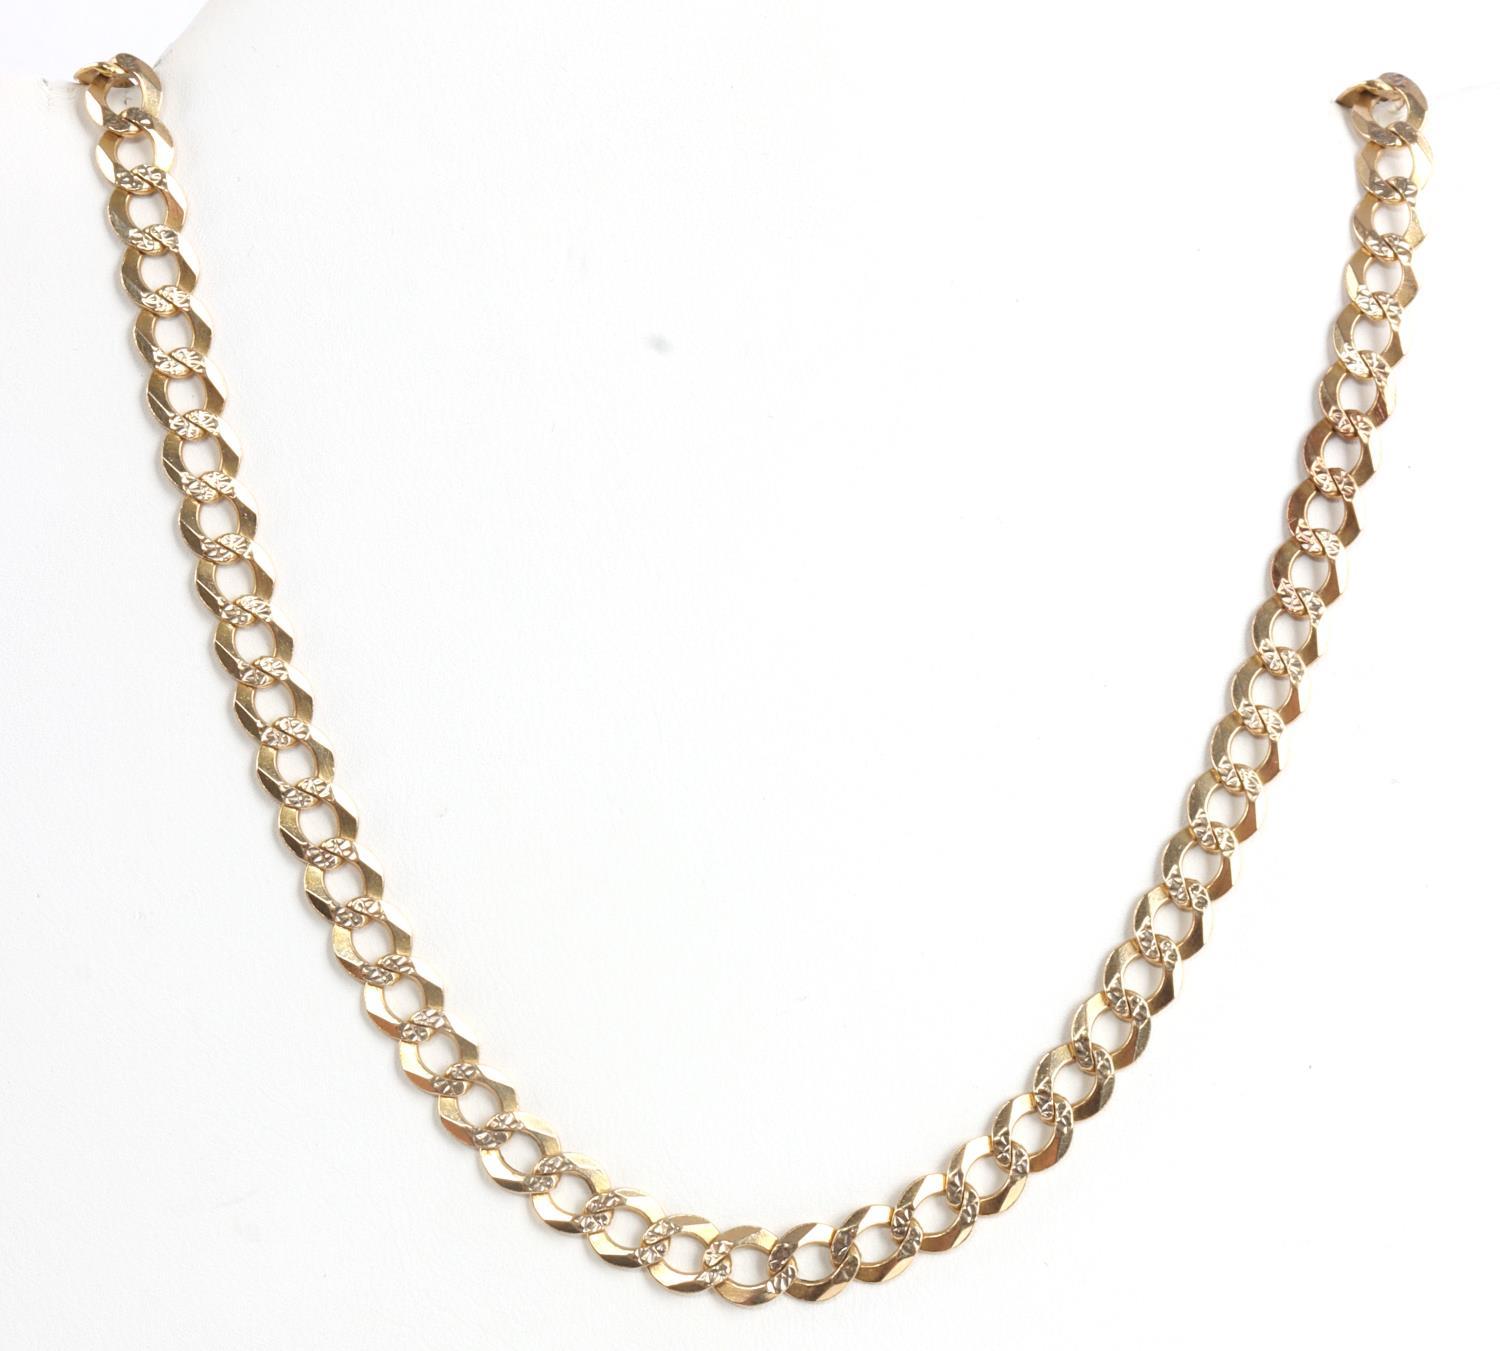 10KT GOLD CURB CHAIN WITH DIAMOND CUT ACCENT